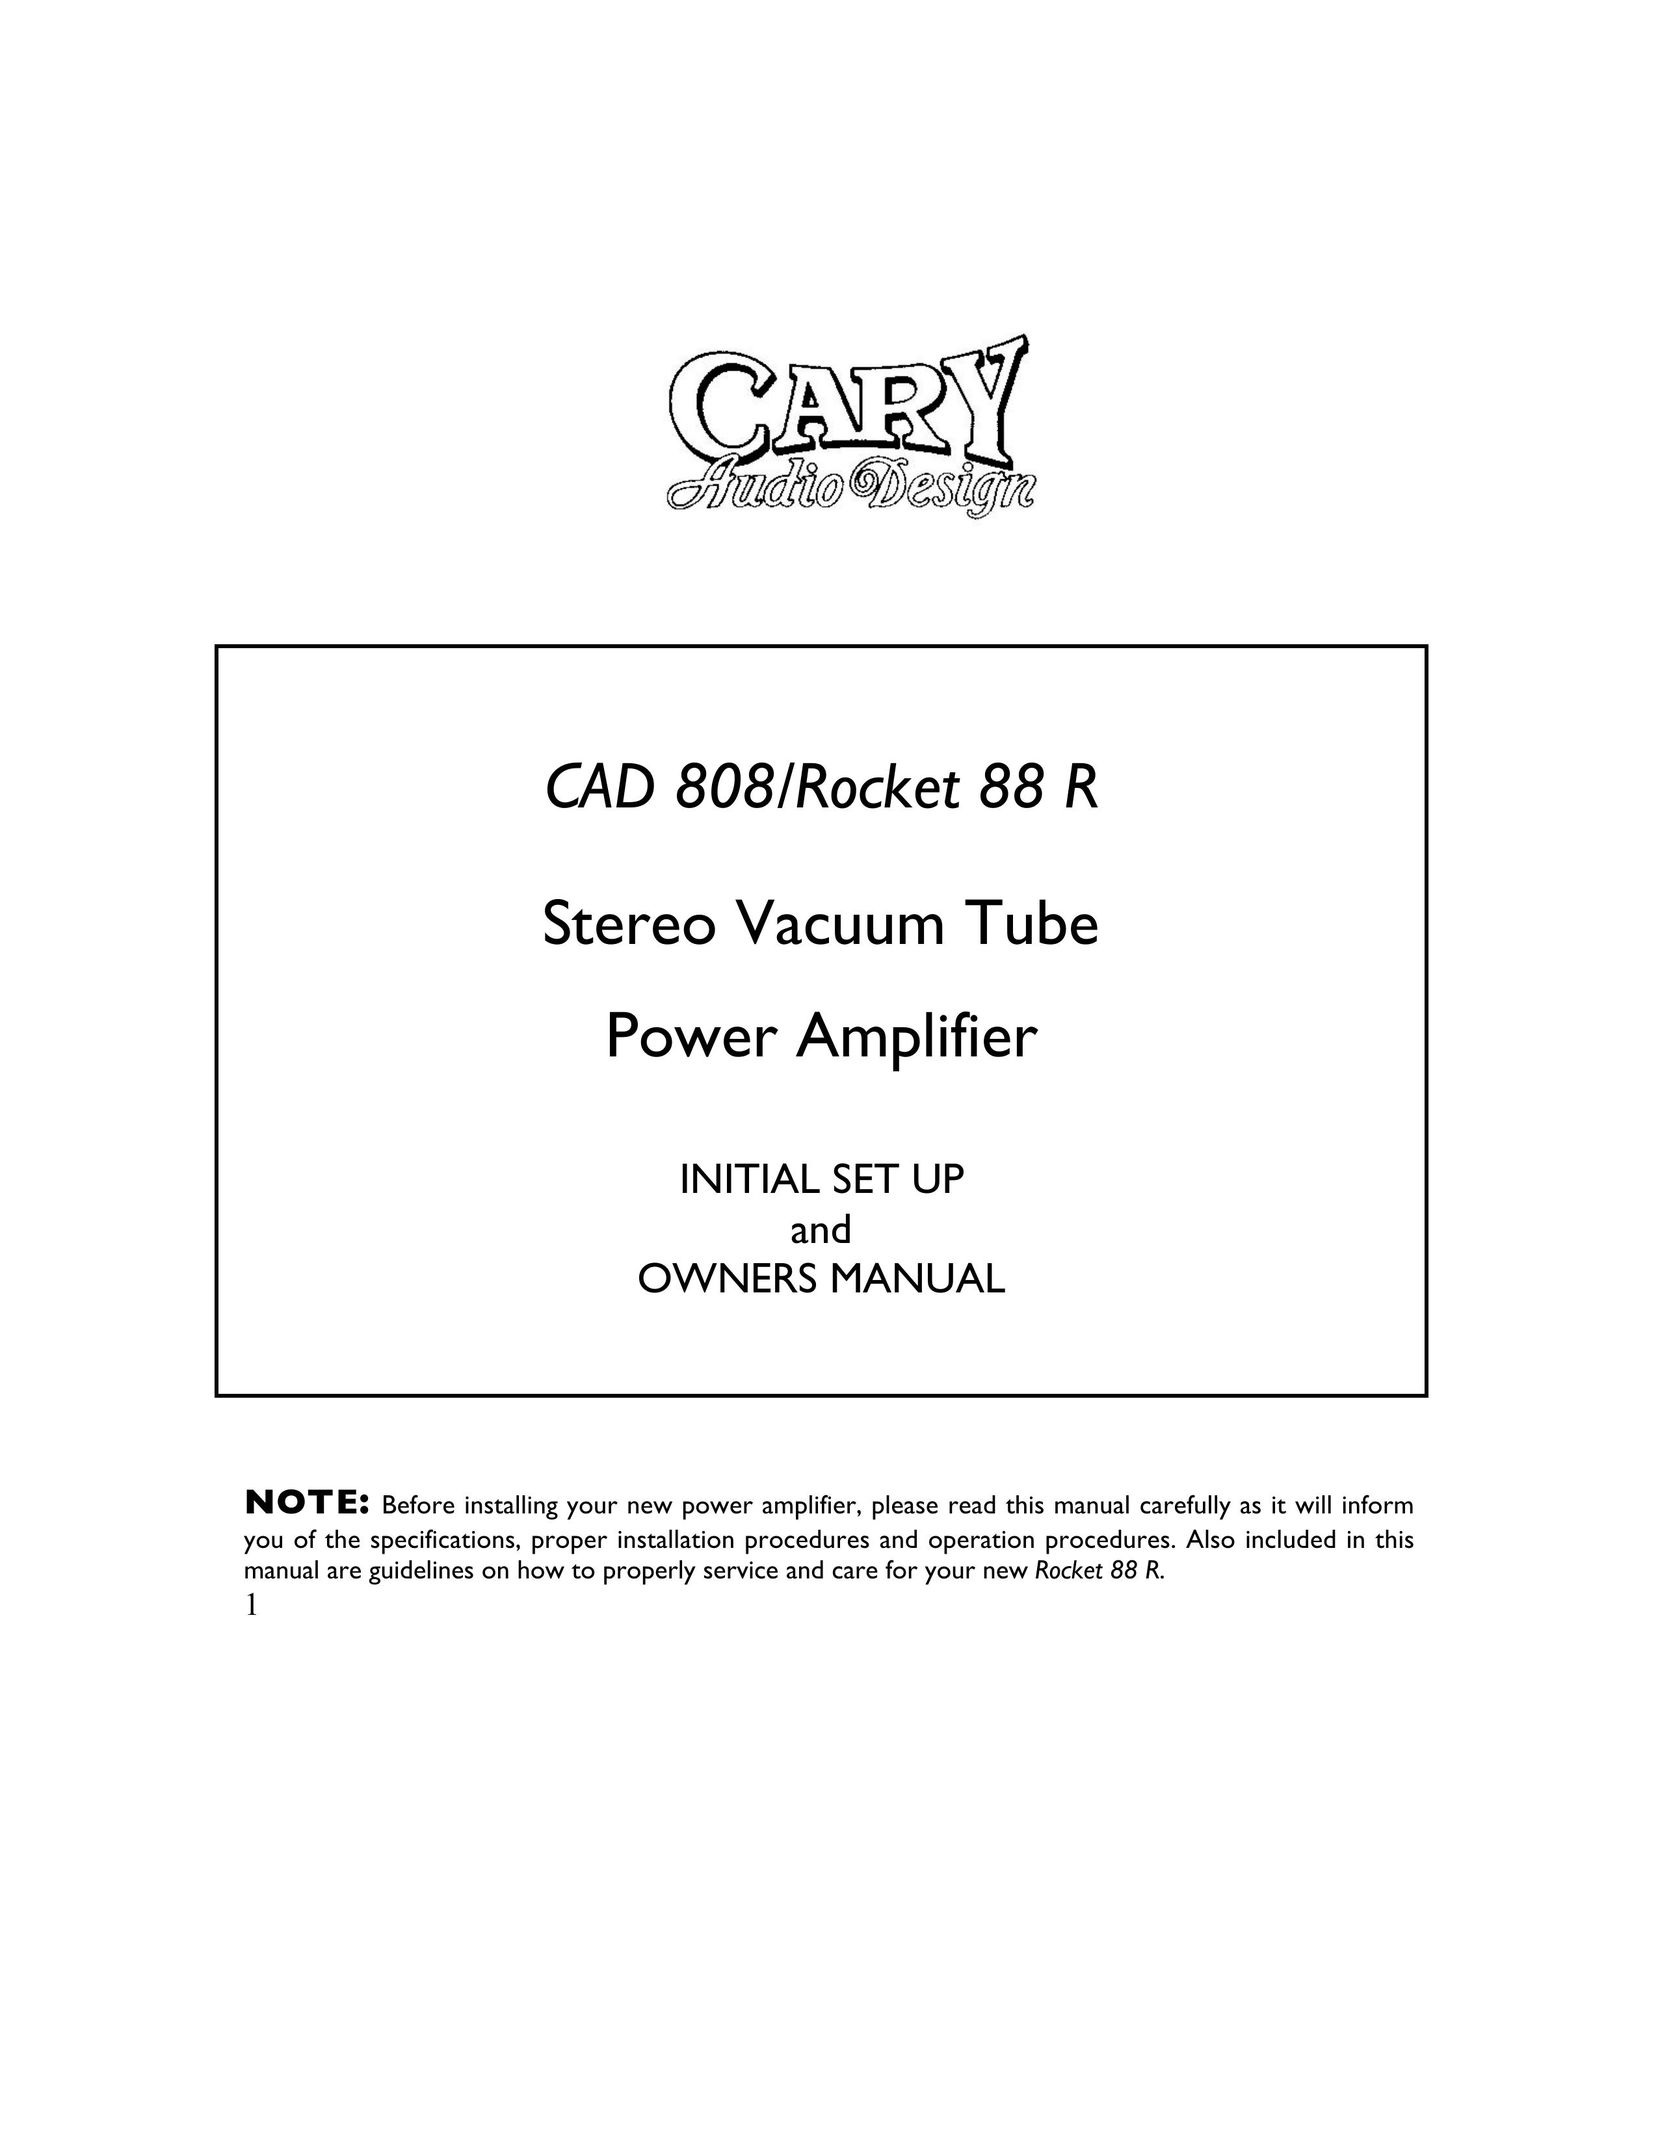 Cary Audio Design Rocket 88 R Stereo Amplifier User Manual